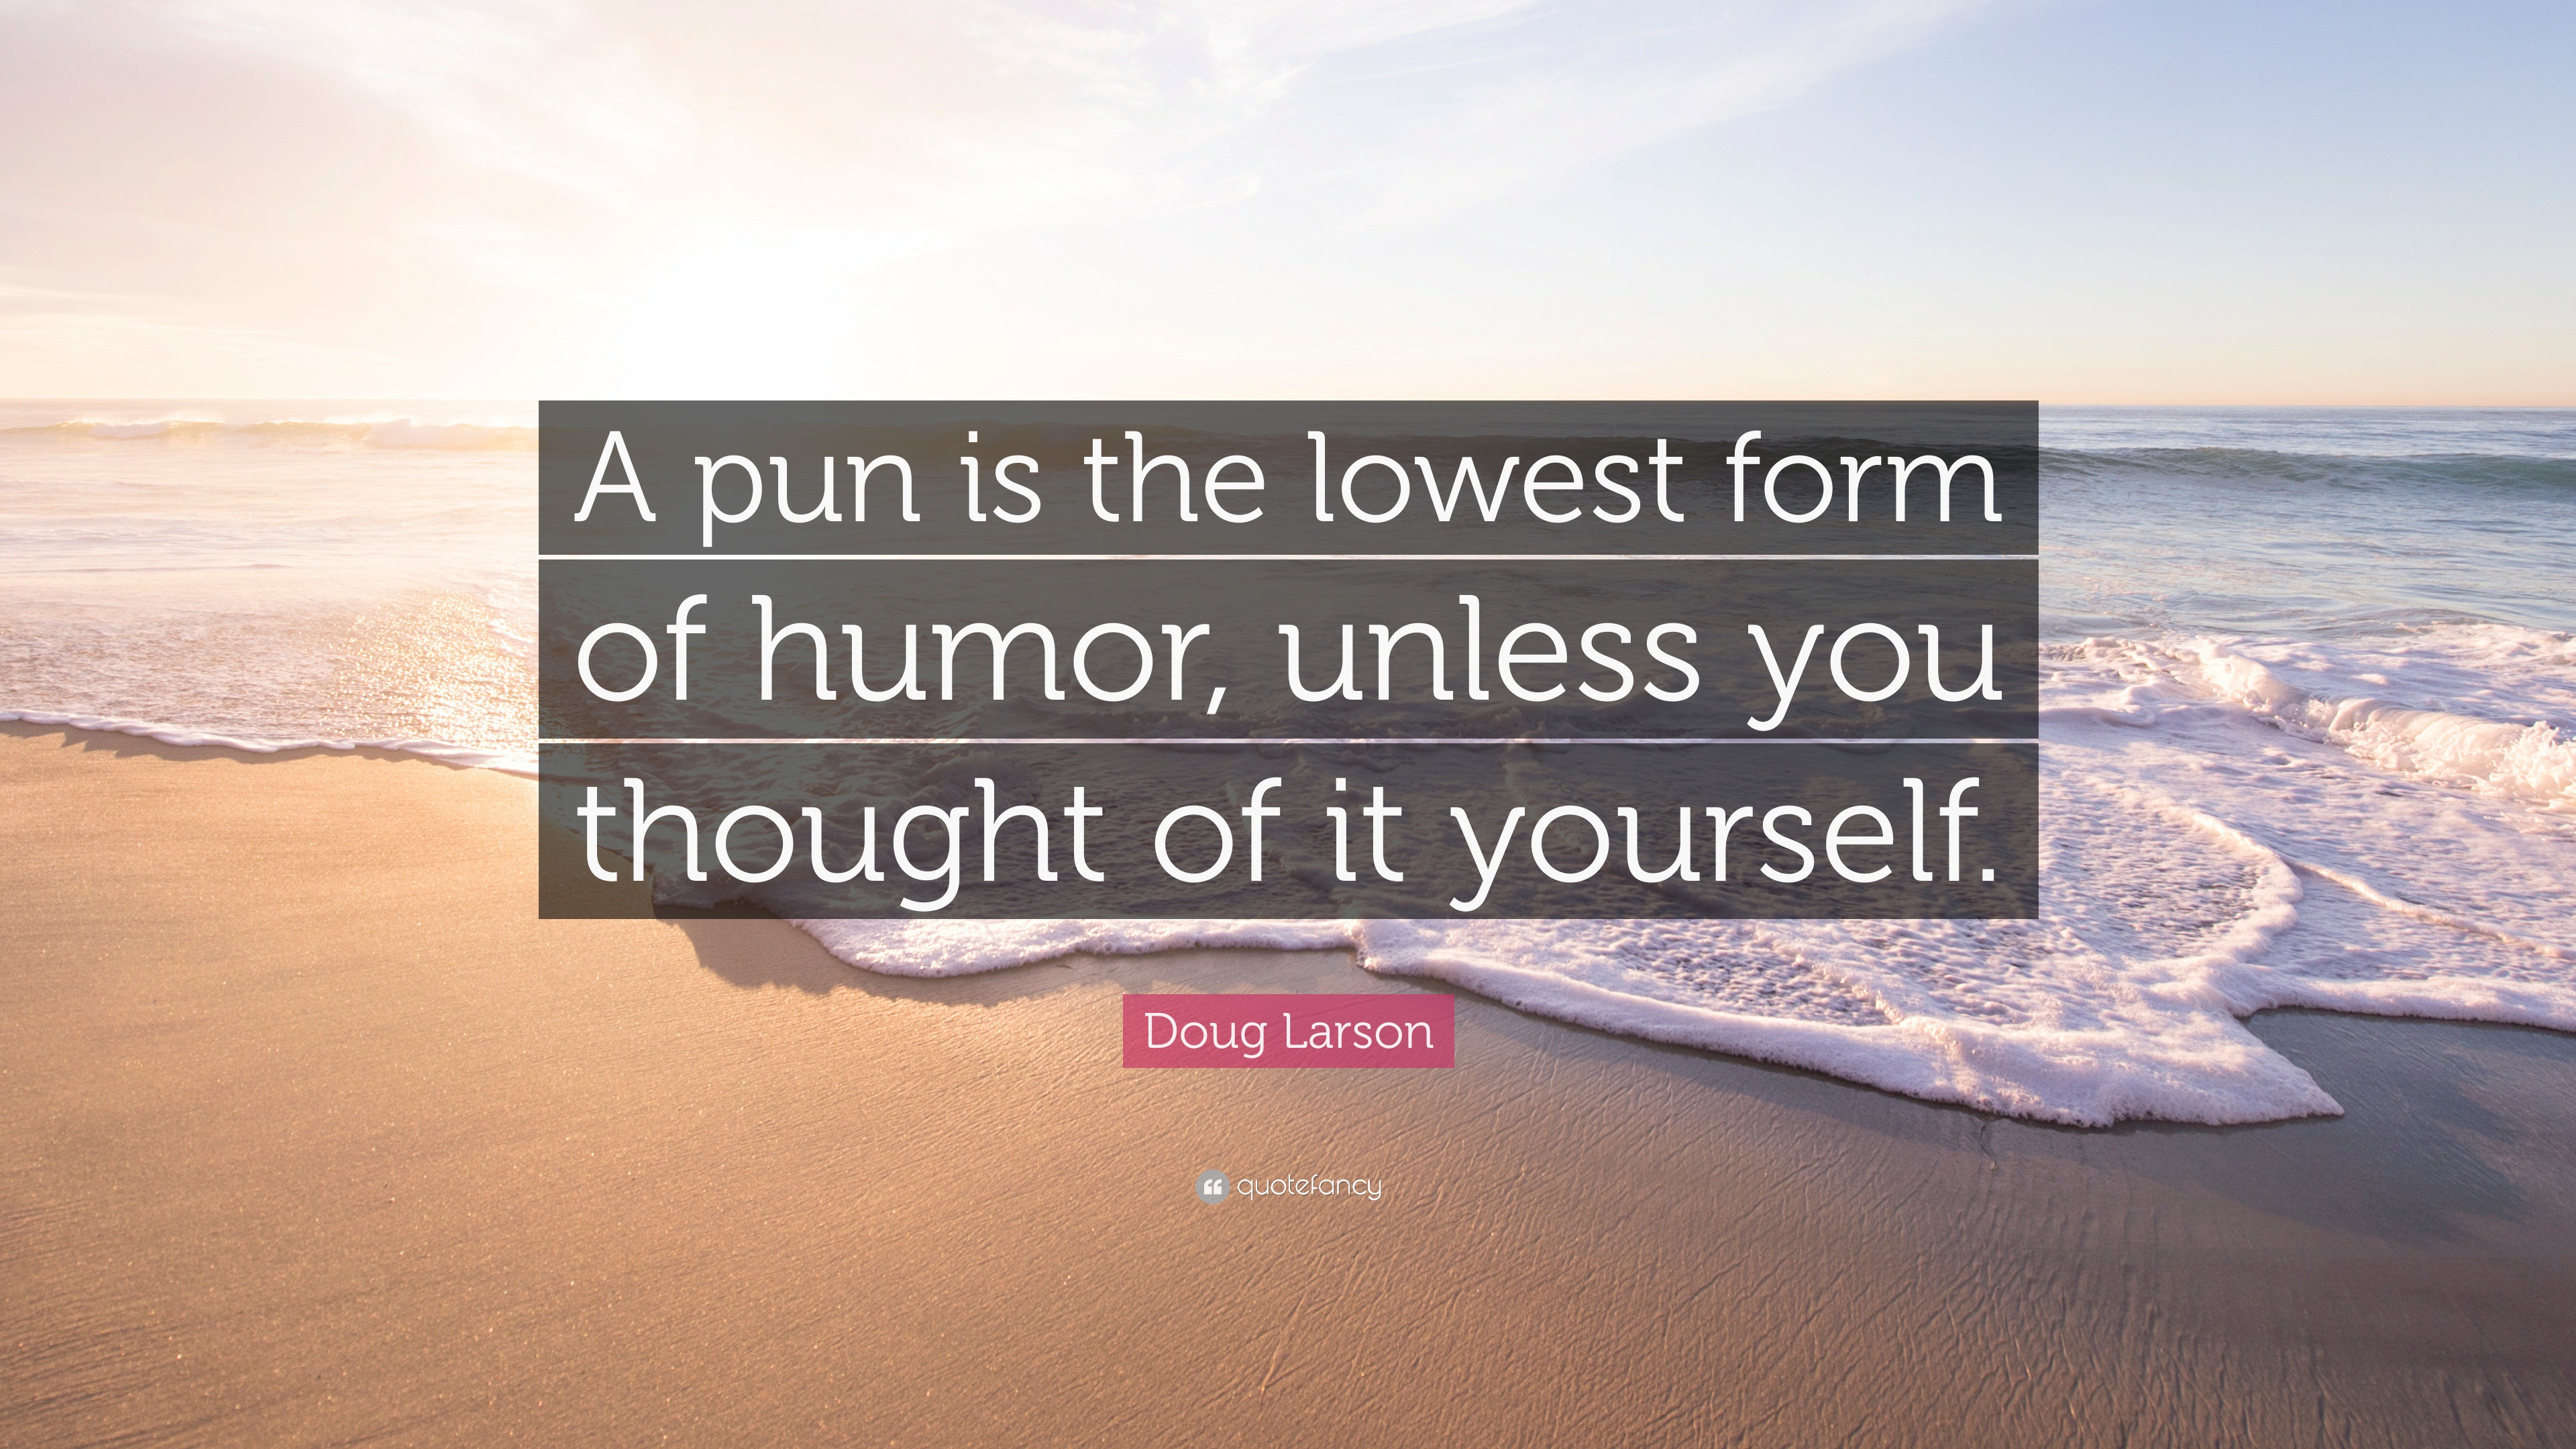 A pun is the lowest form of humor, unless you thought of it yourself. 